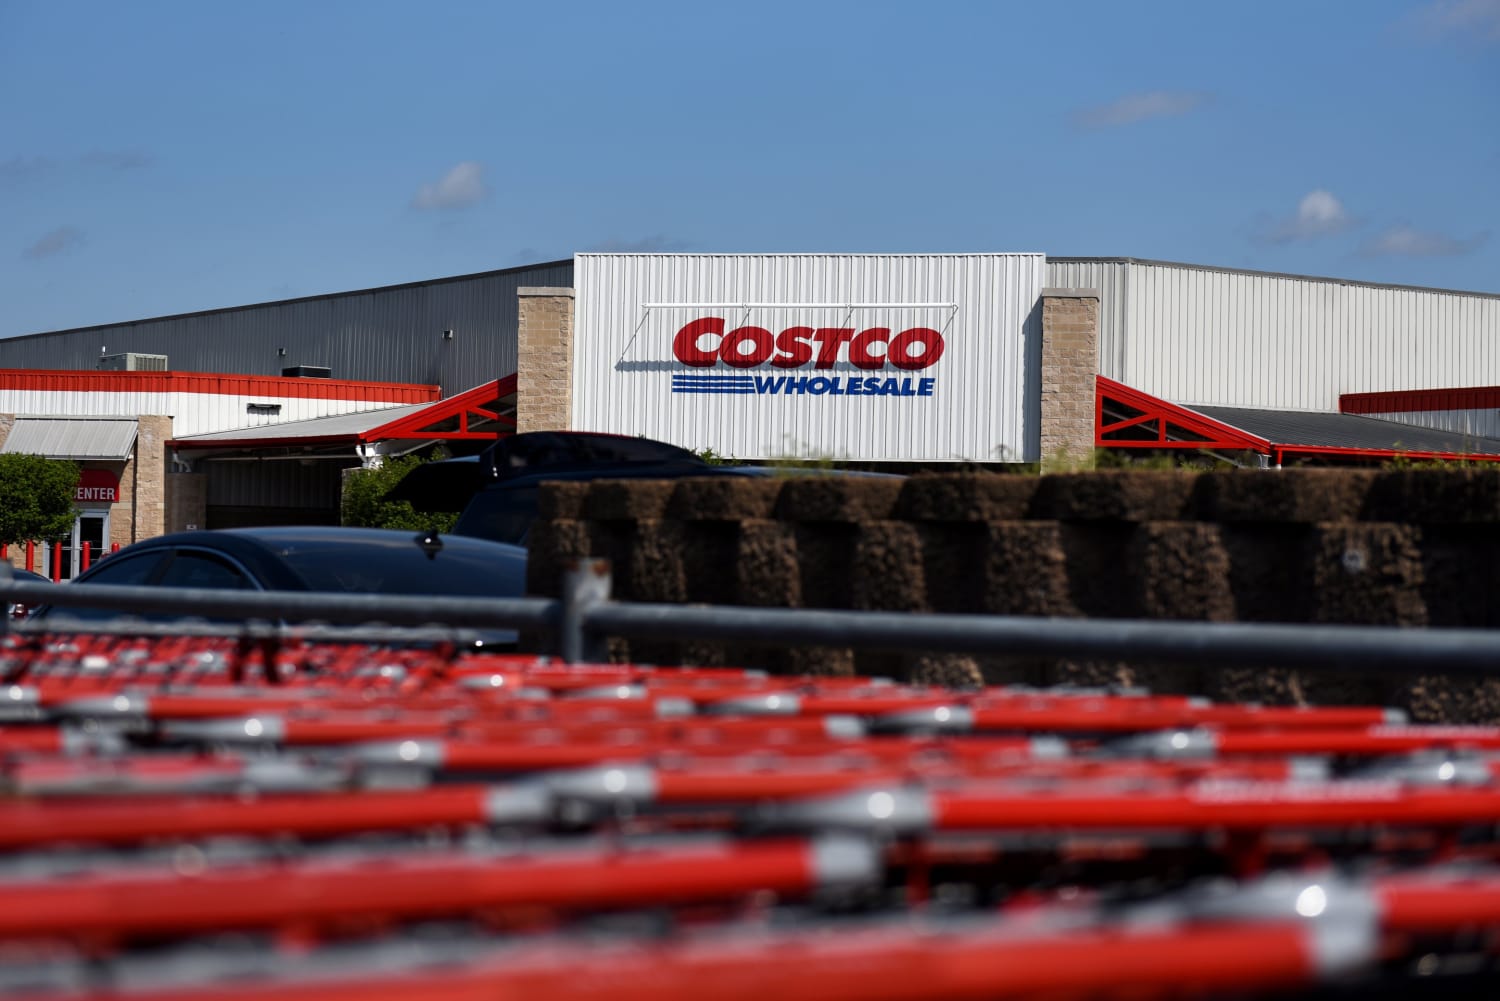 Costco shares update on raising its membership prices